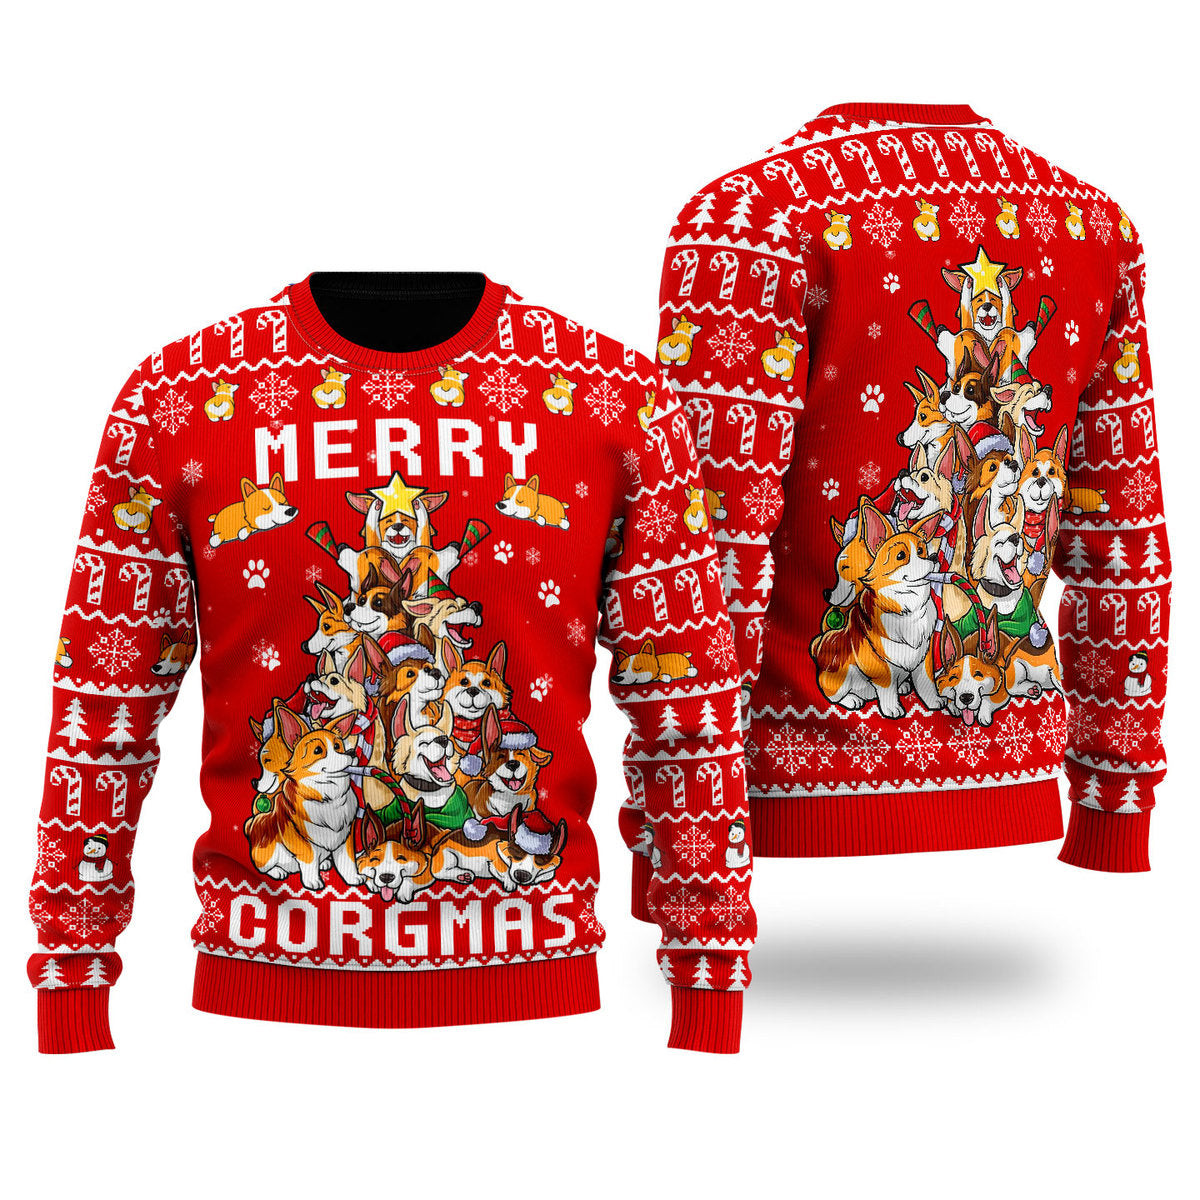 Funny Corgi Merry Corgmas Ugly Christmas Sweater Ugly Sweater For Men Women, Holiday Sweater